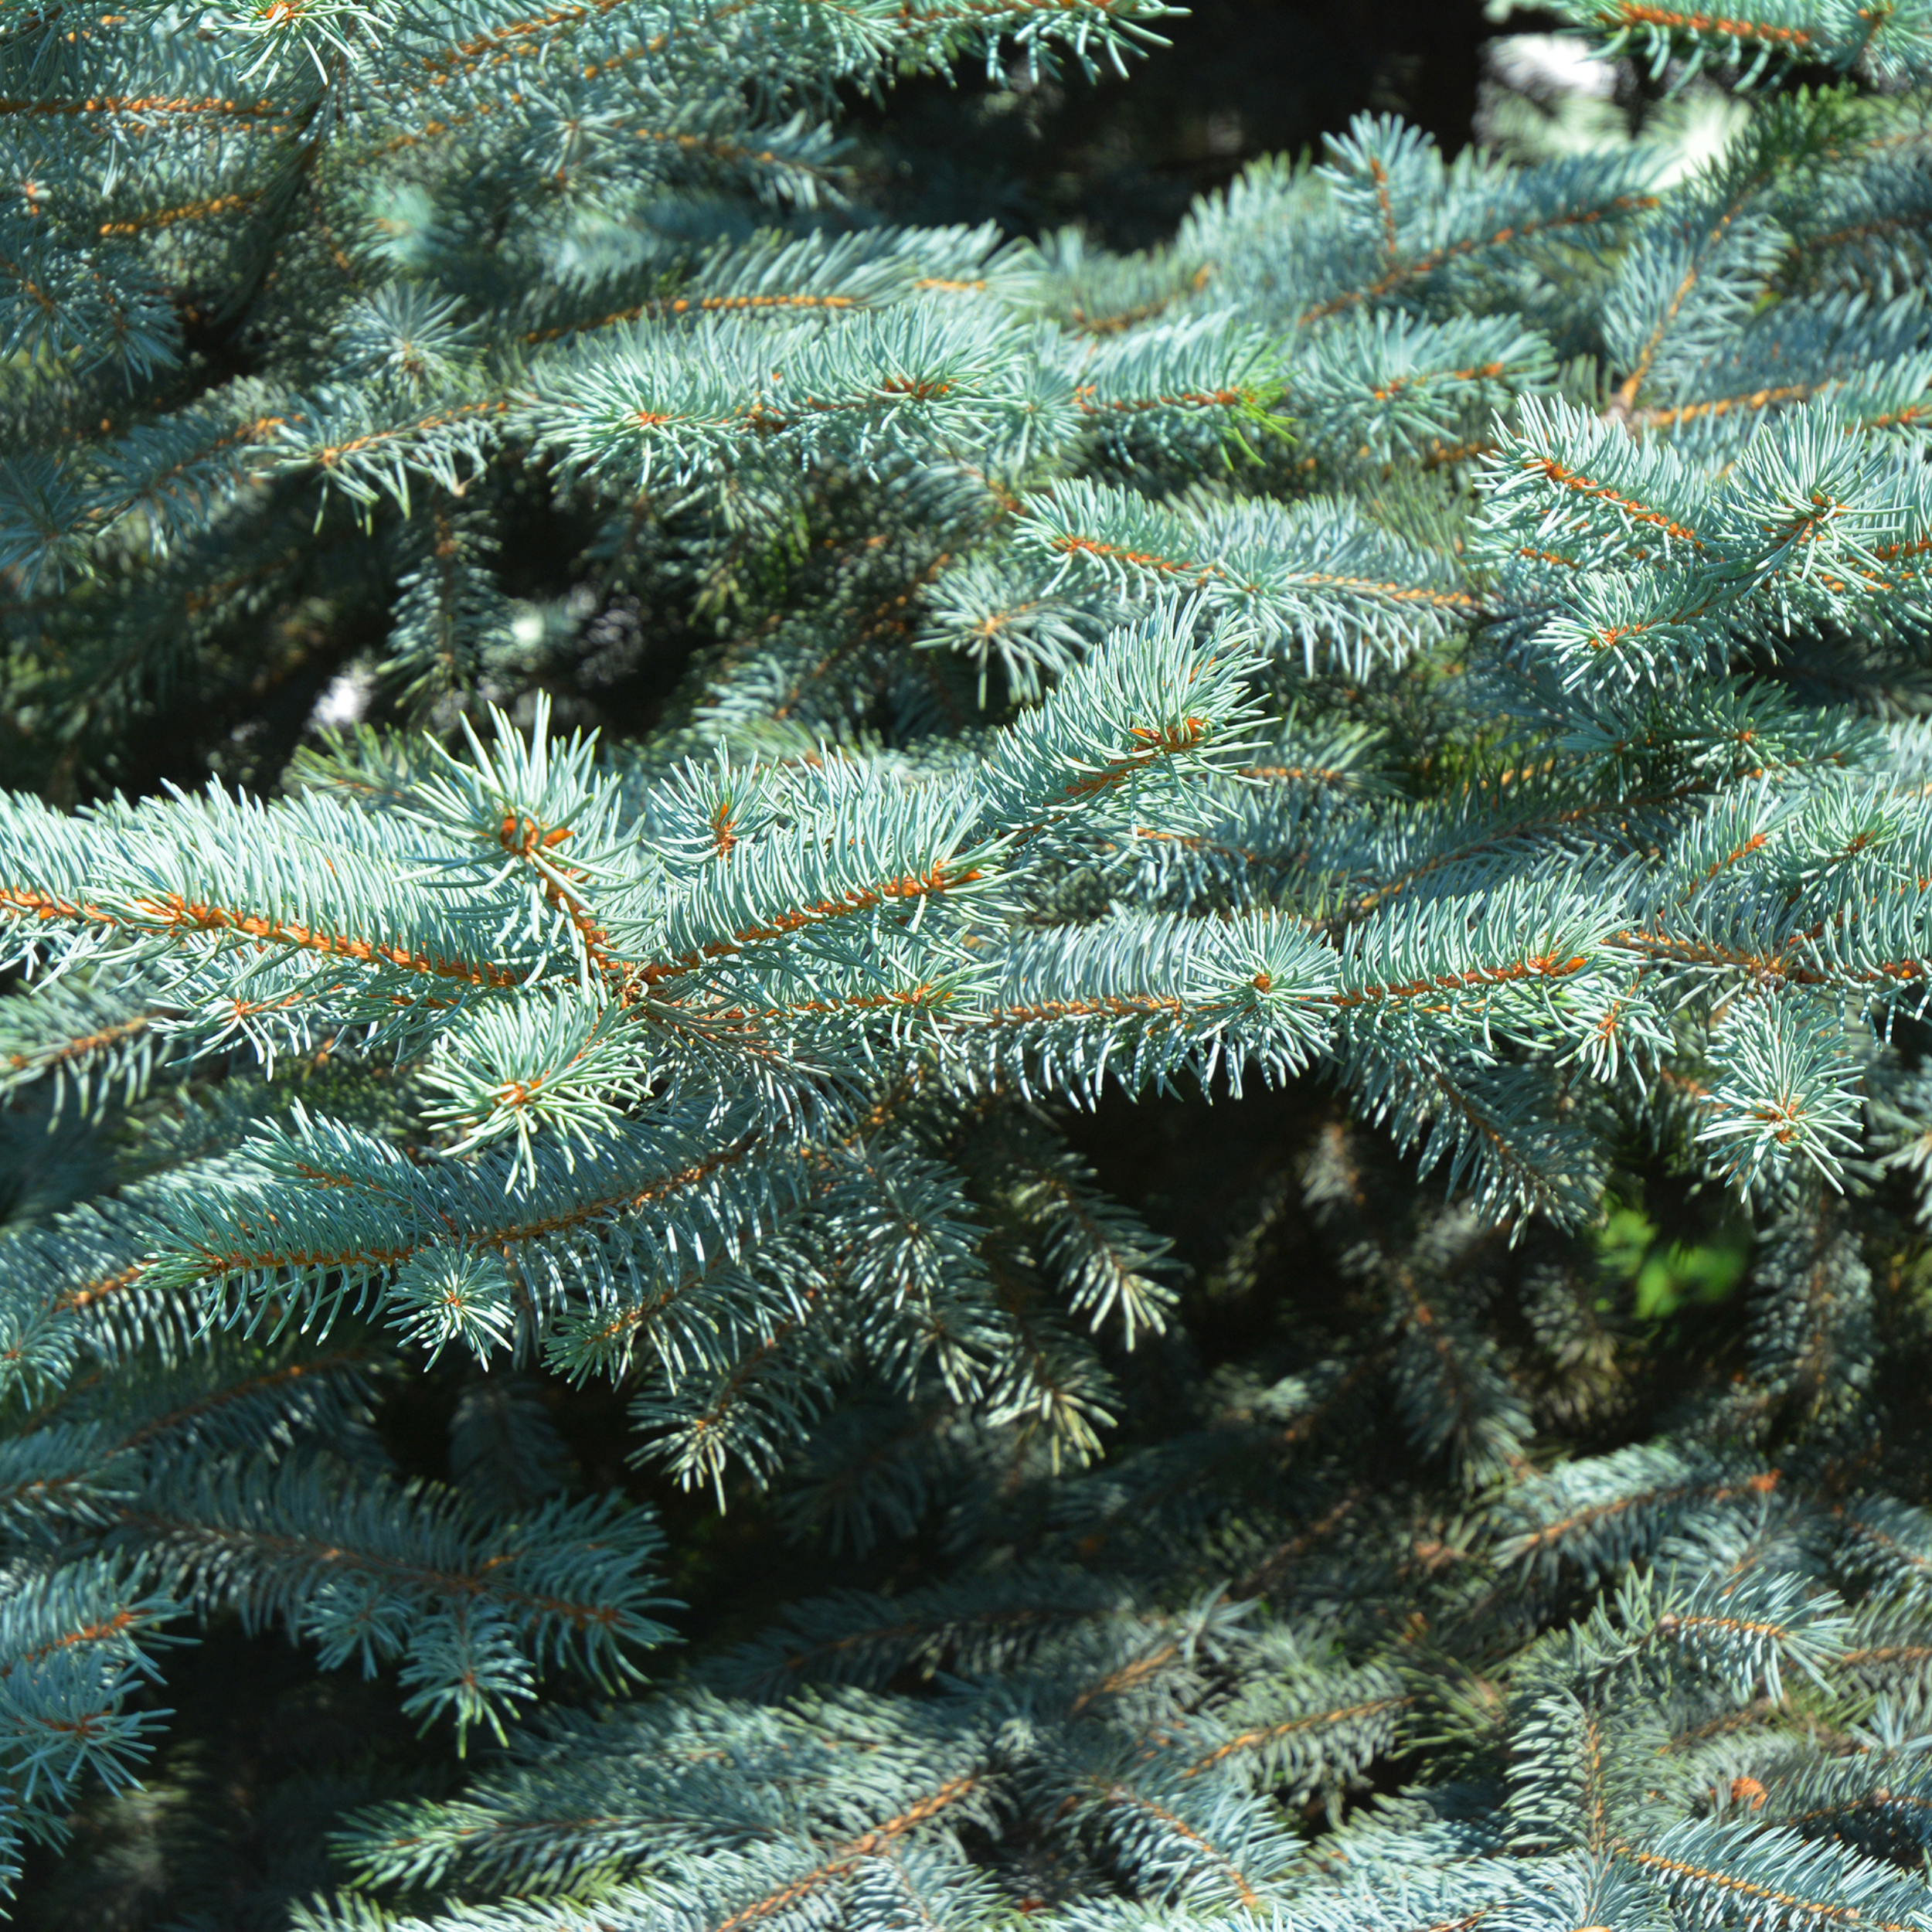 How To Grow Blue Spruce (Picea pungens)